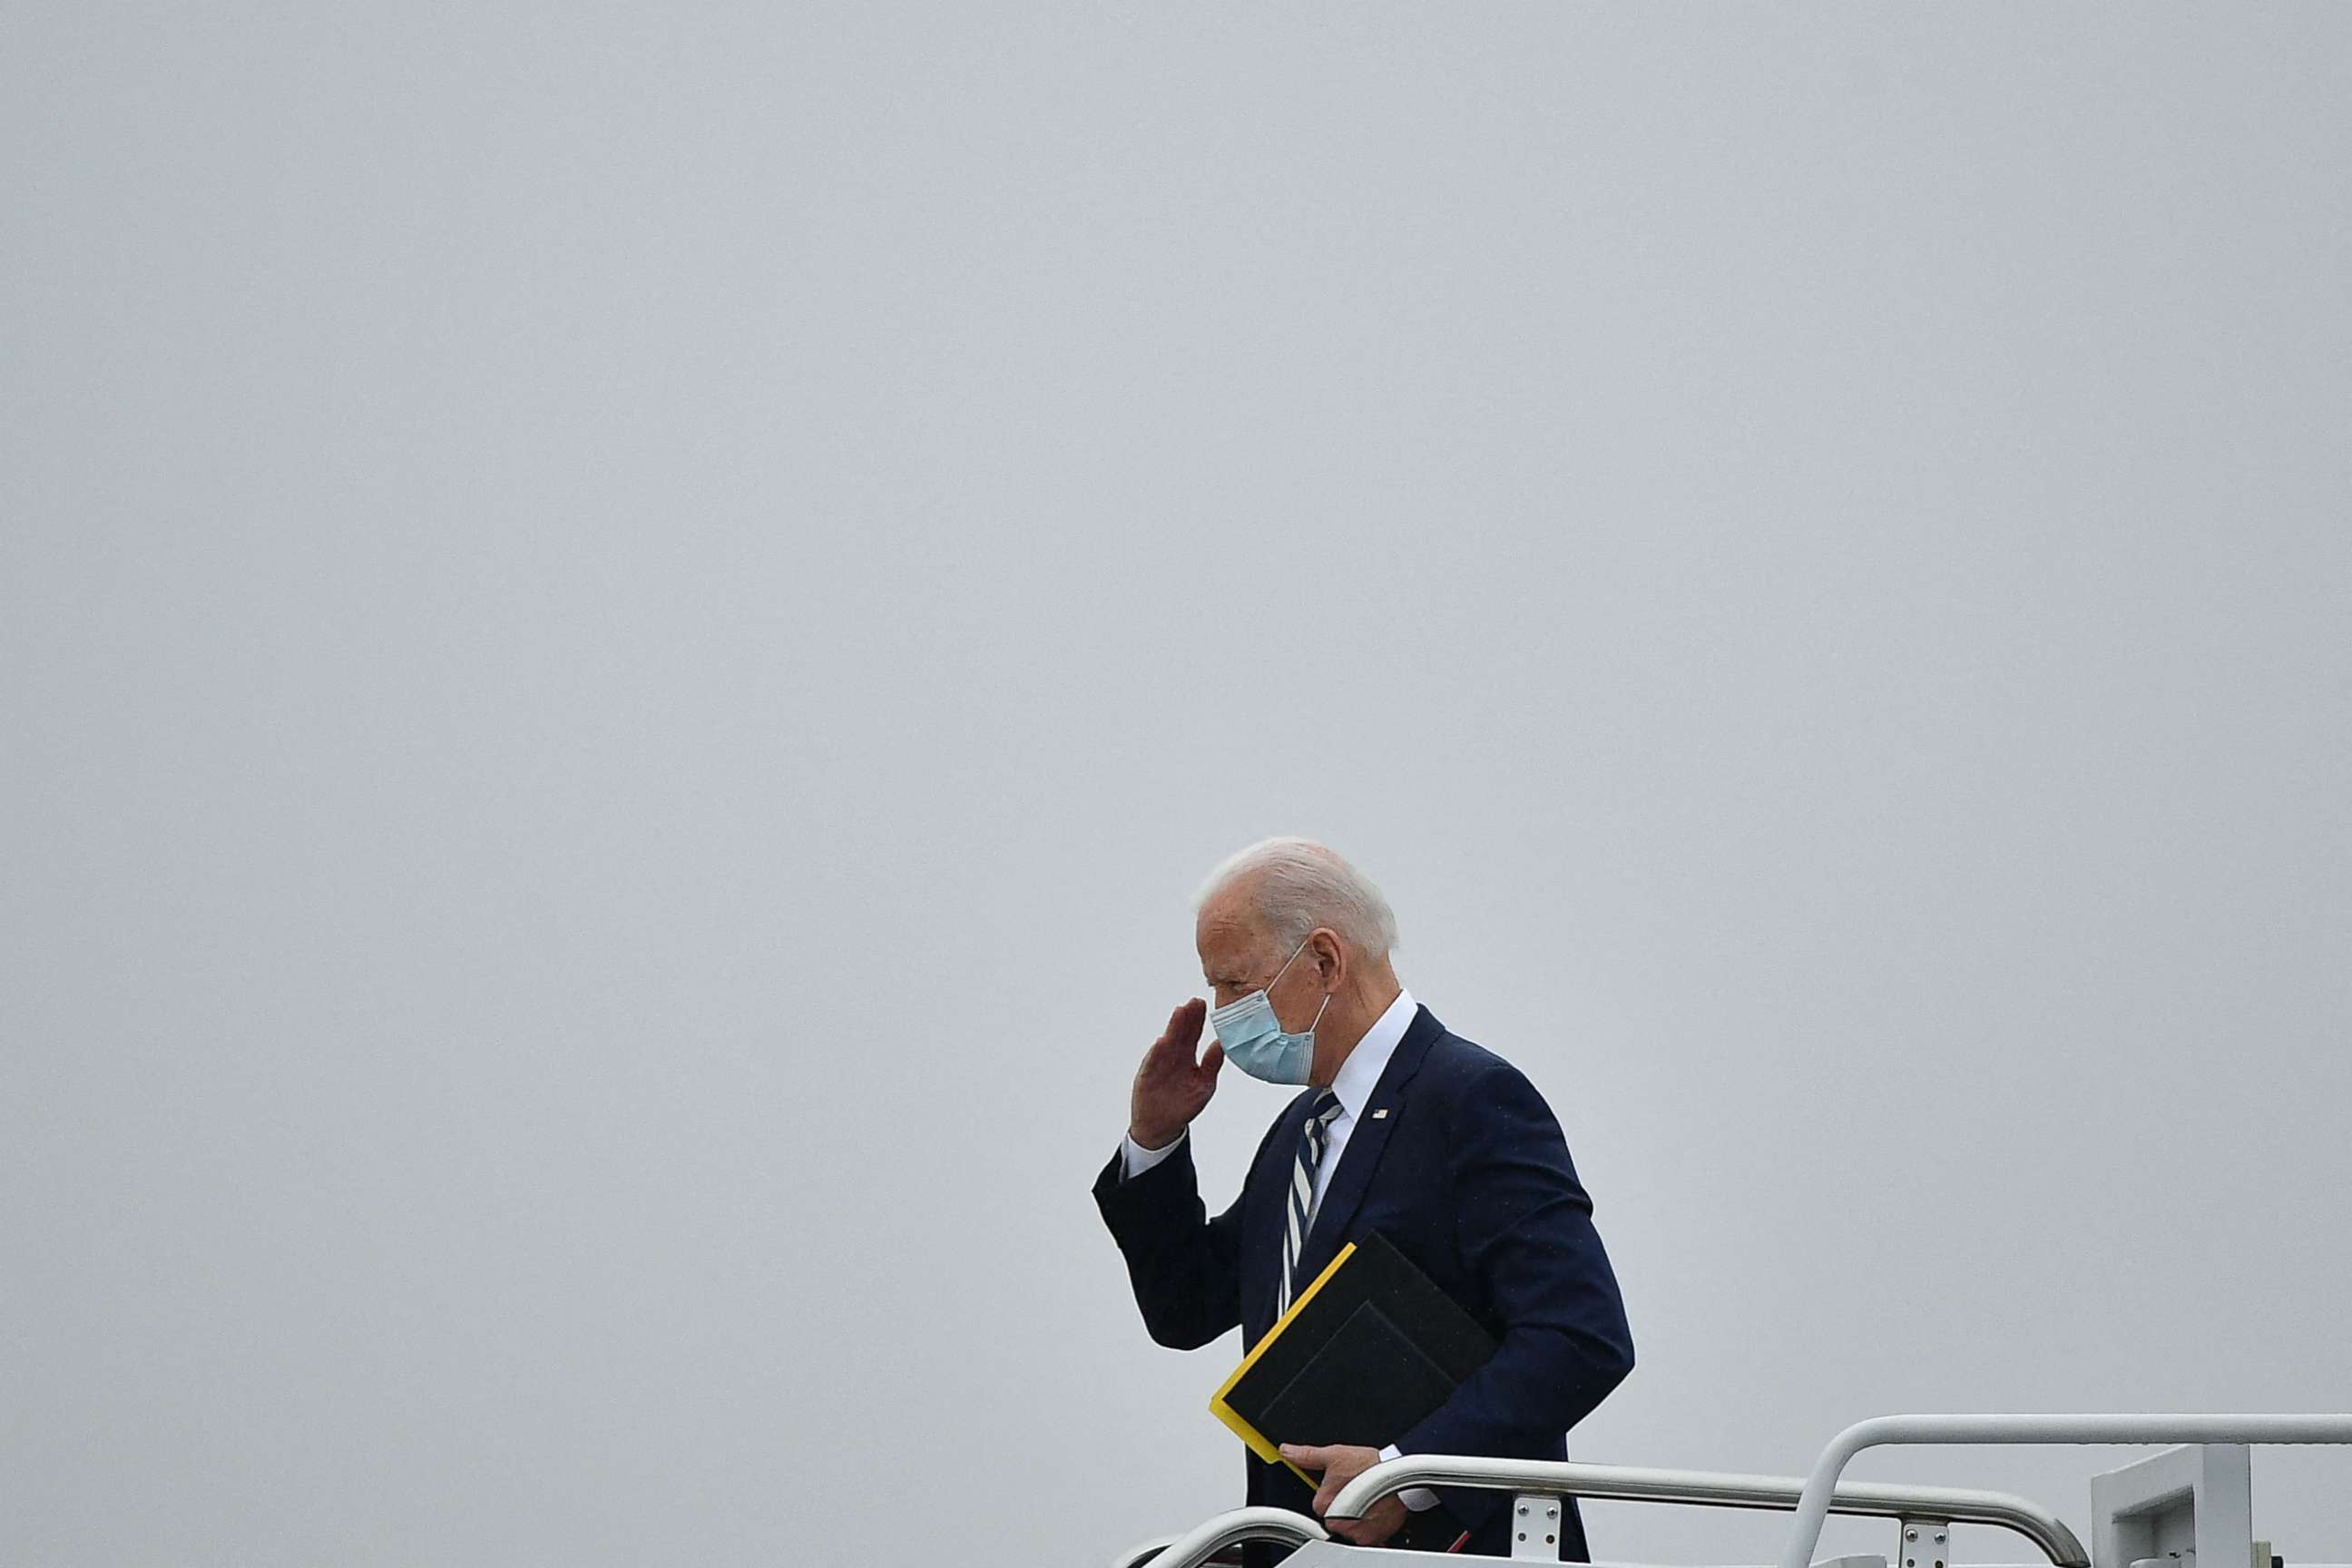 PHOTO: US President Joe Biden salutes before he boards Air Force One departing from New Castle Airport in New Castle, Delaware on March 1, 2021. - Biden is returning to Washington after spending the weekend at his Wilmington home. 